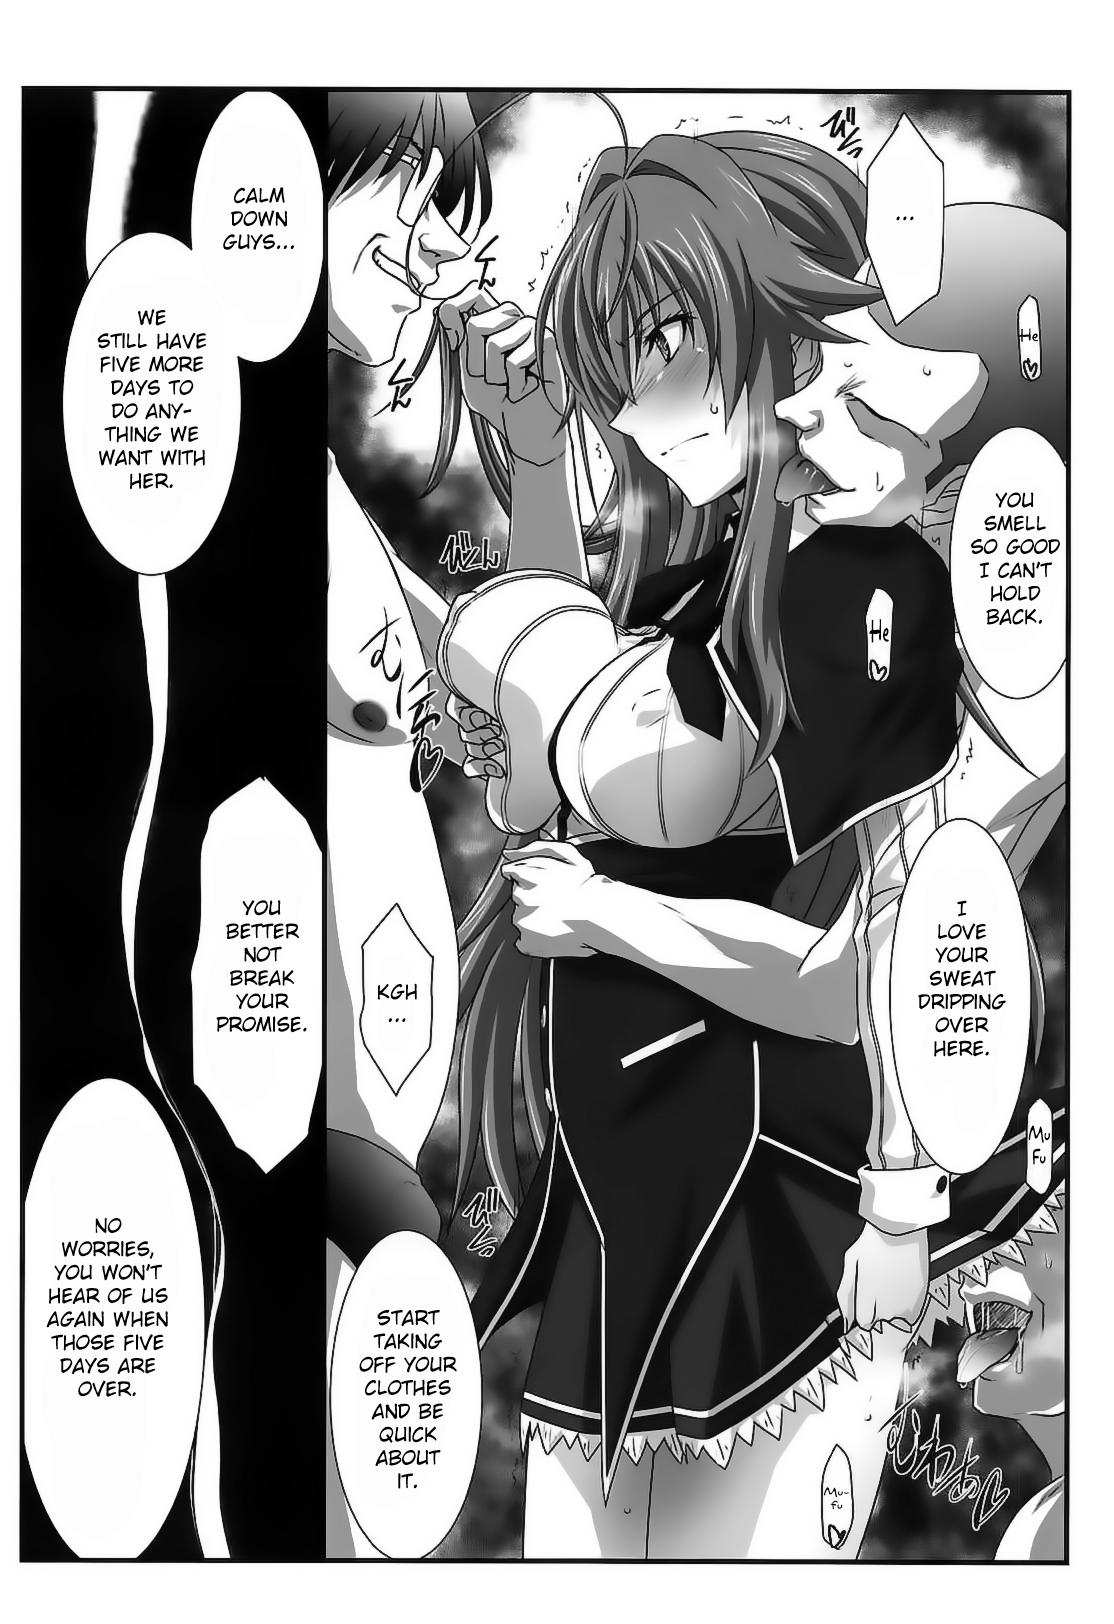 Squirting SPIRAL ZONE DxD II - Highschool dxd Throatfuck - Page 5